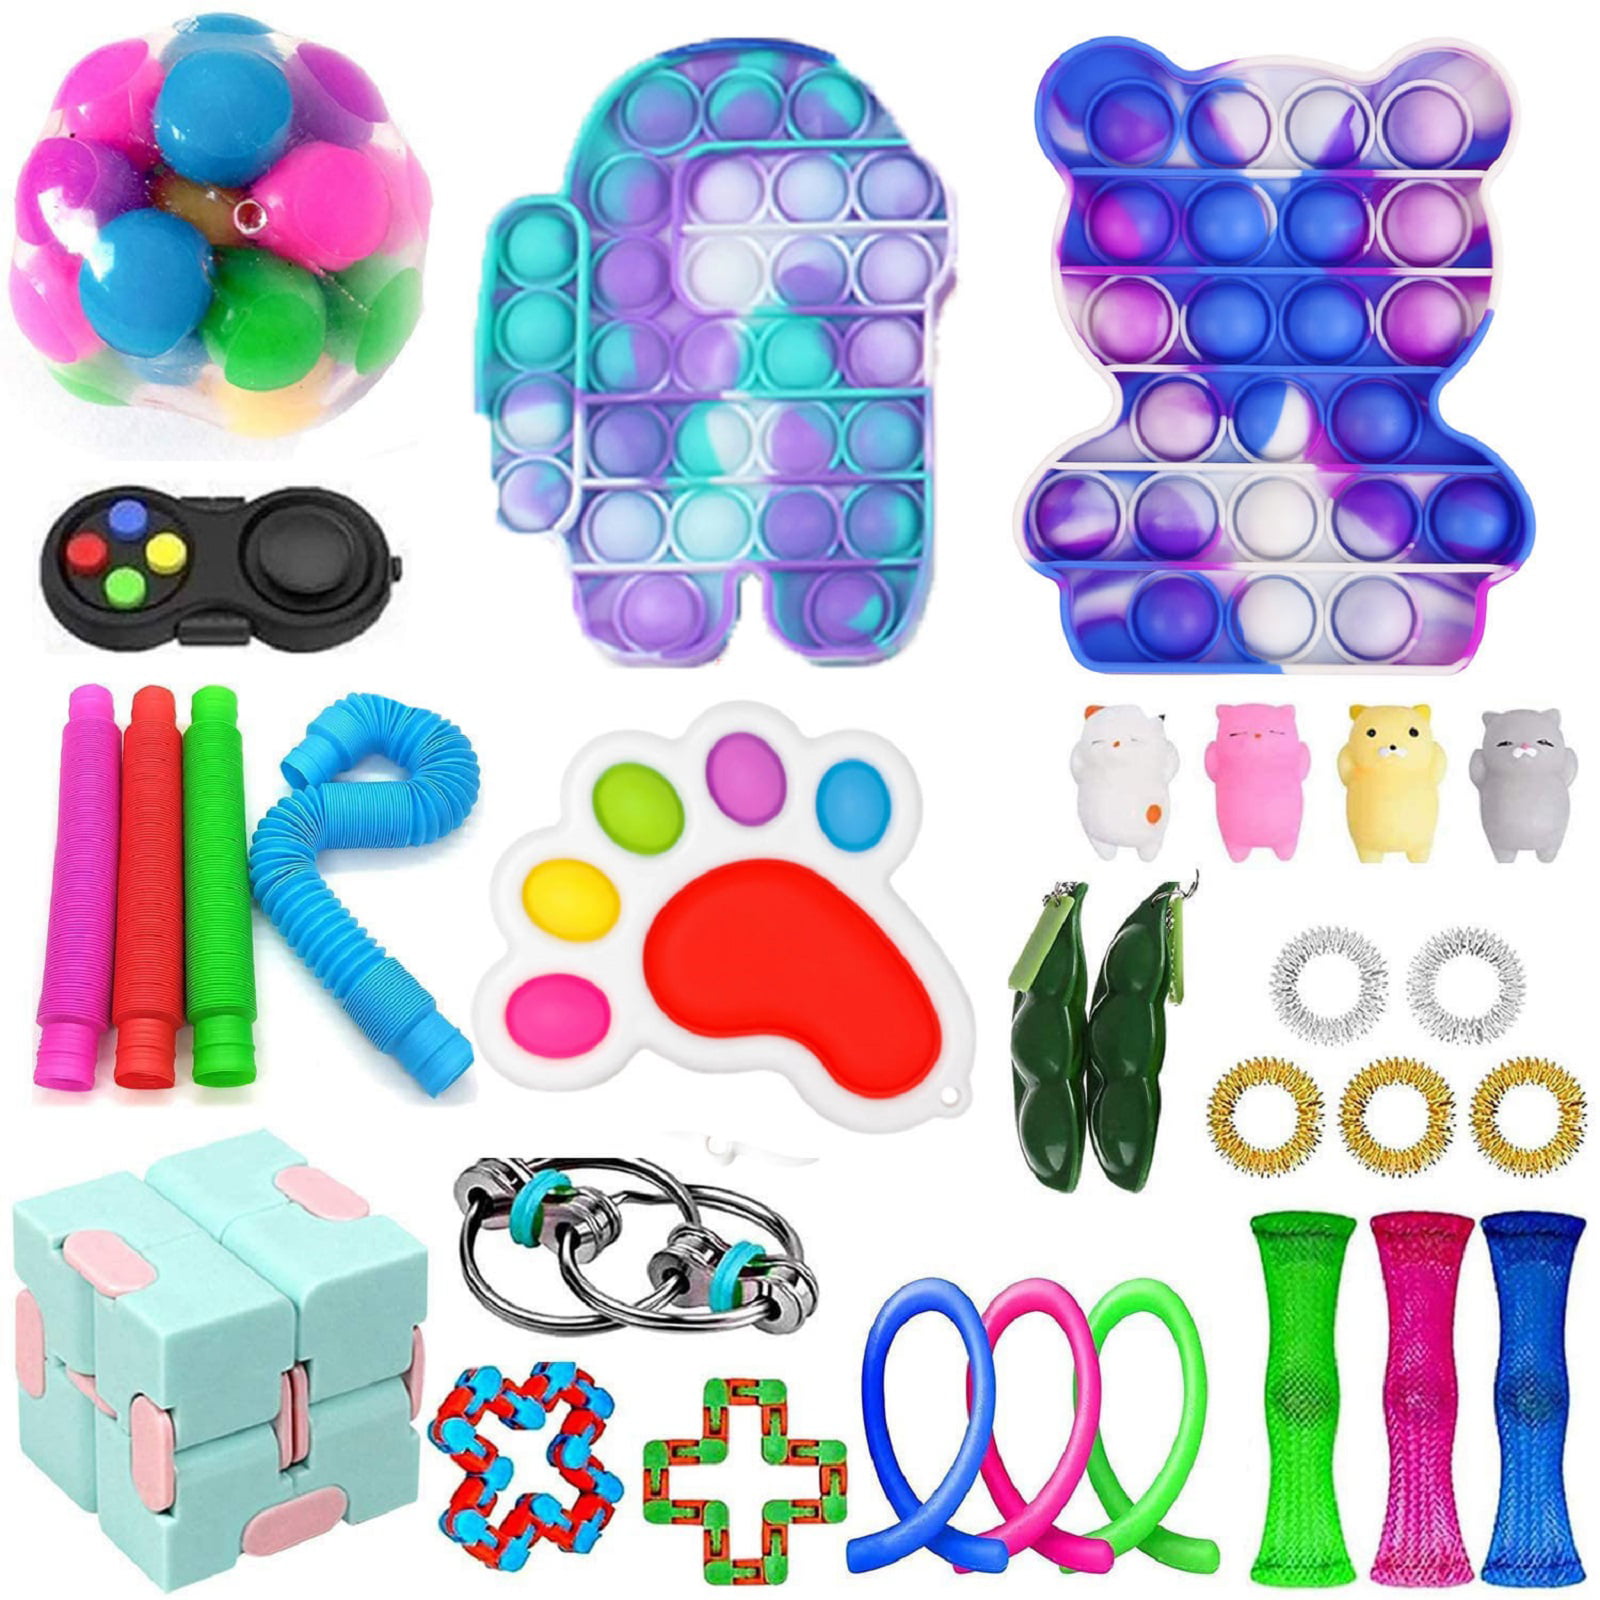 Details about   12 Pack Fidget Sensory Toys Set Stocking Stuffer For Stress Relief Anti-Anxiety 